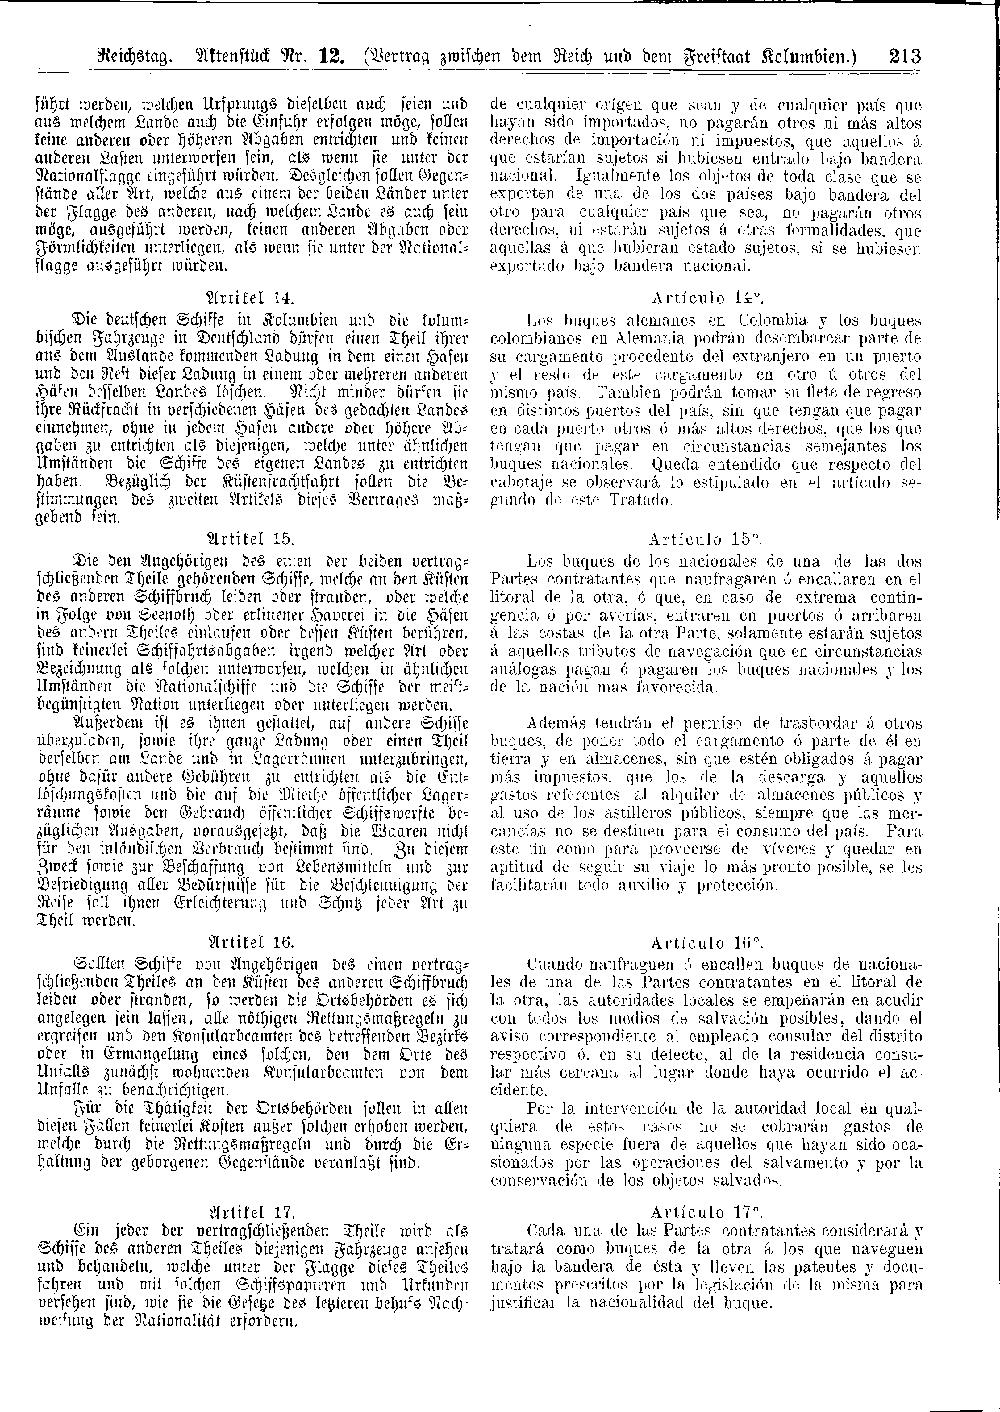 Scan of page 213